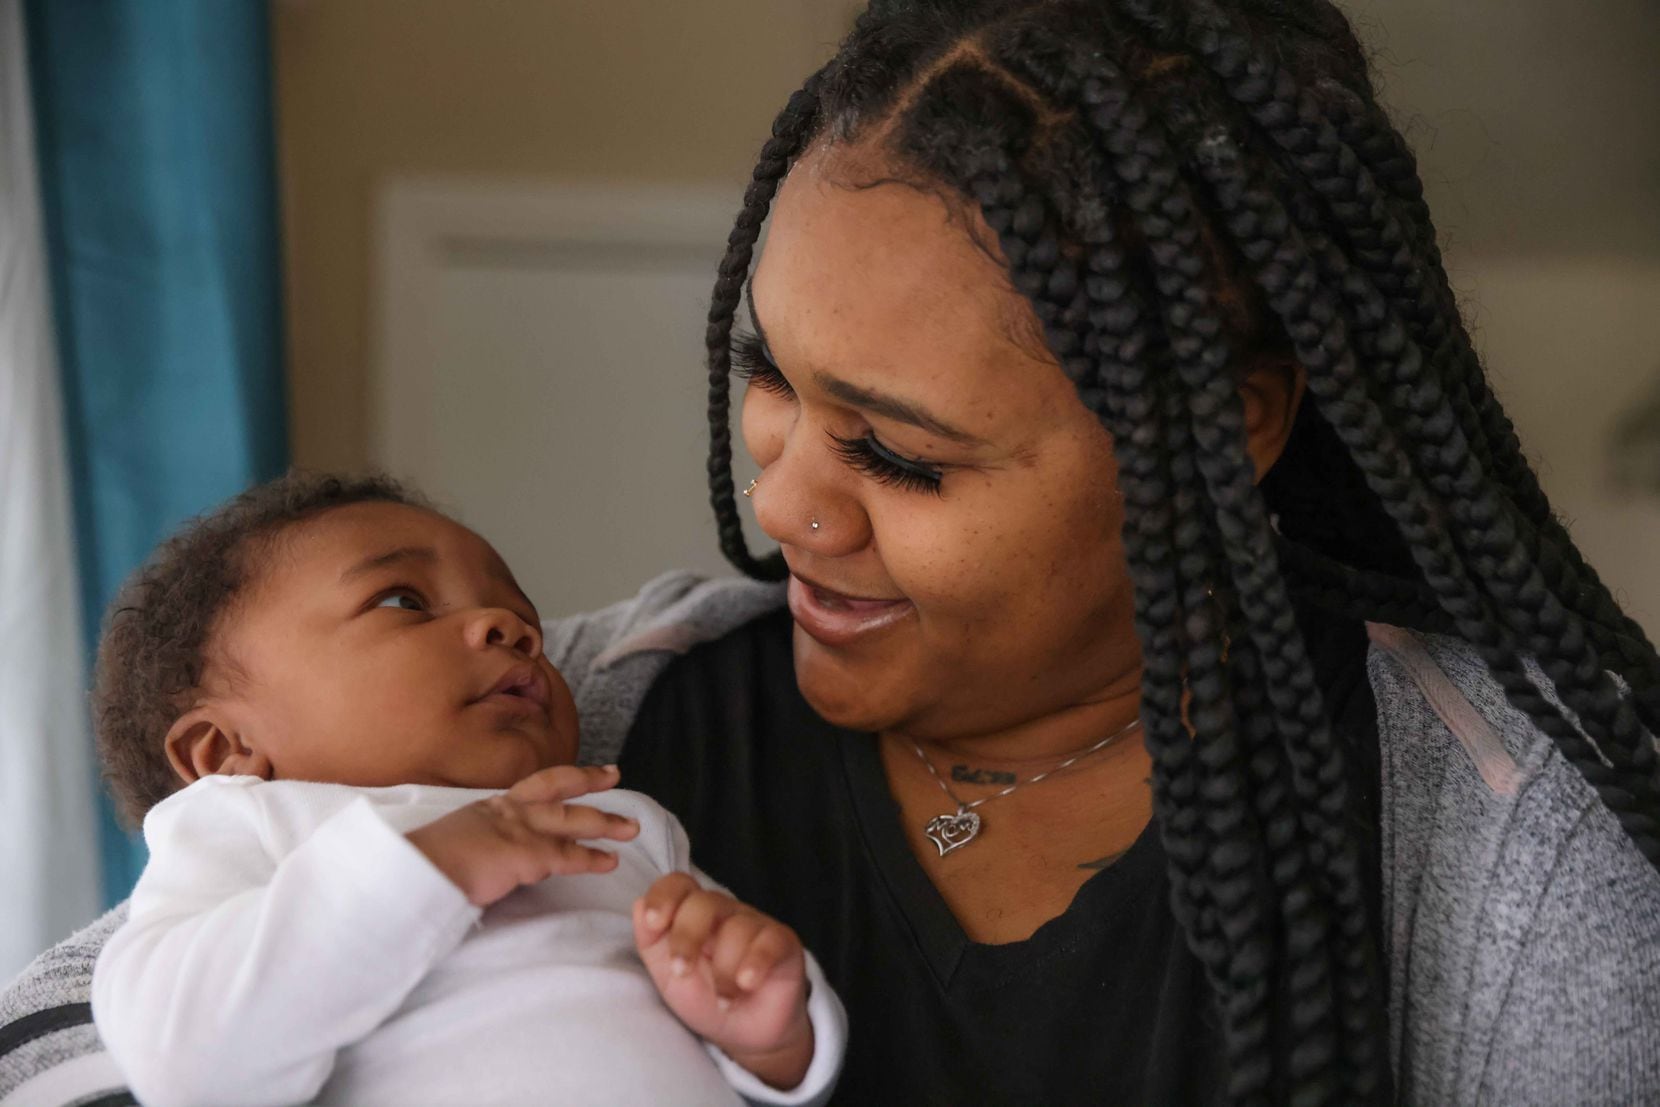 Roqueshea Lockett holds Ermias to pose for a portrait at her home in Dallas on Saturday, February 6, 2021. Lockett gave birth to her son two months ago at Lovers Lane Birth Center. (Lola Gomez/The Dallas Morning News)